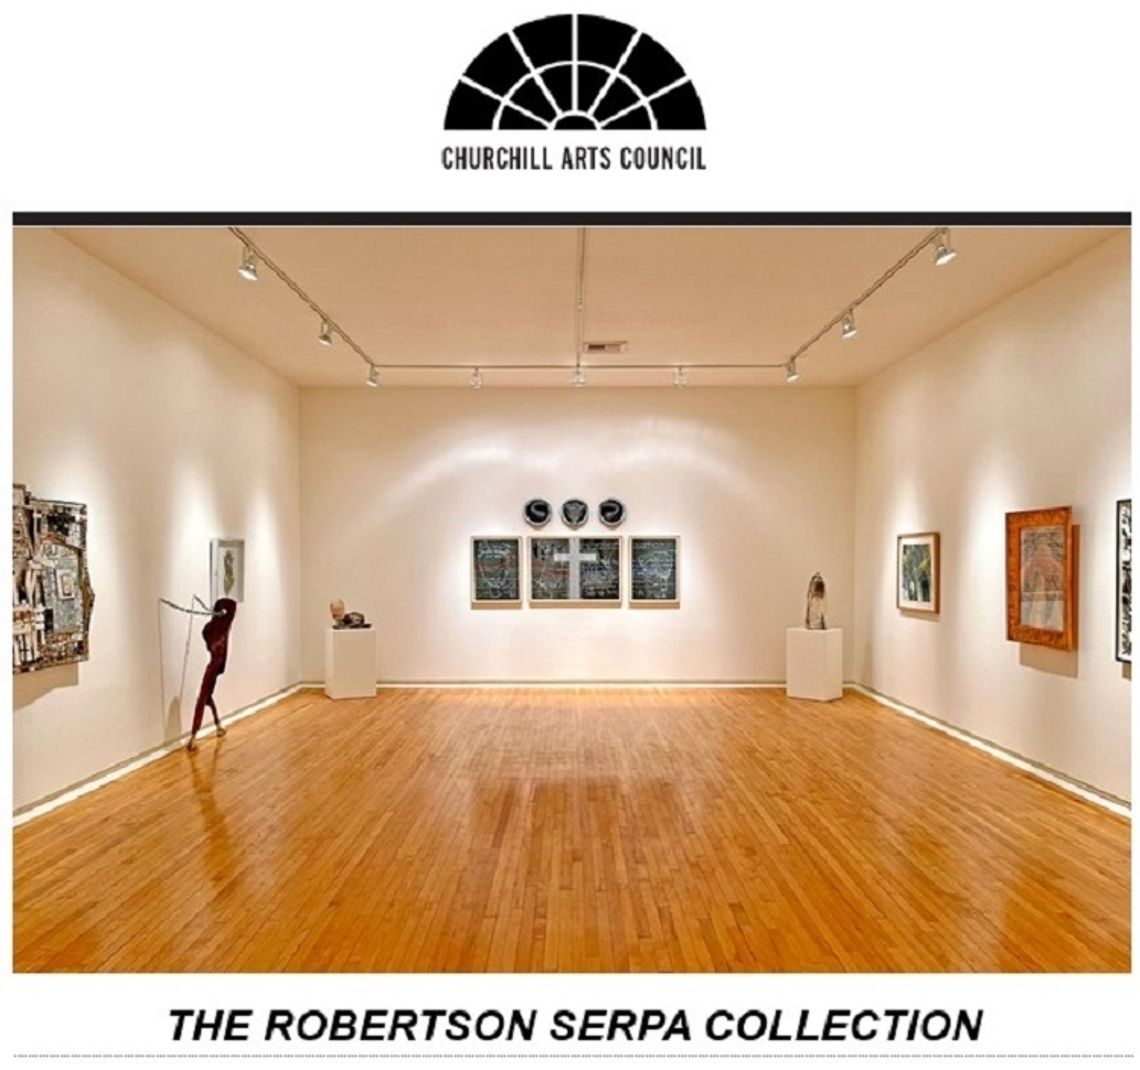 The Robertson Serpa Collection